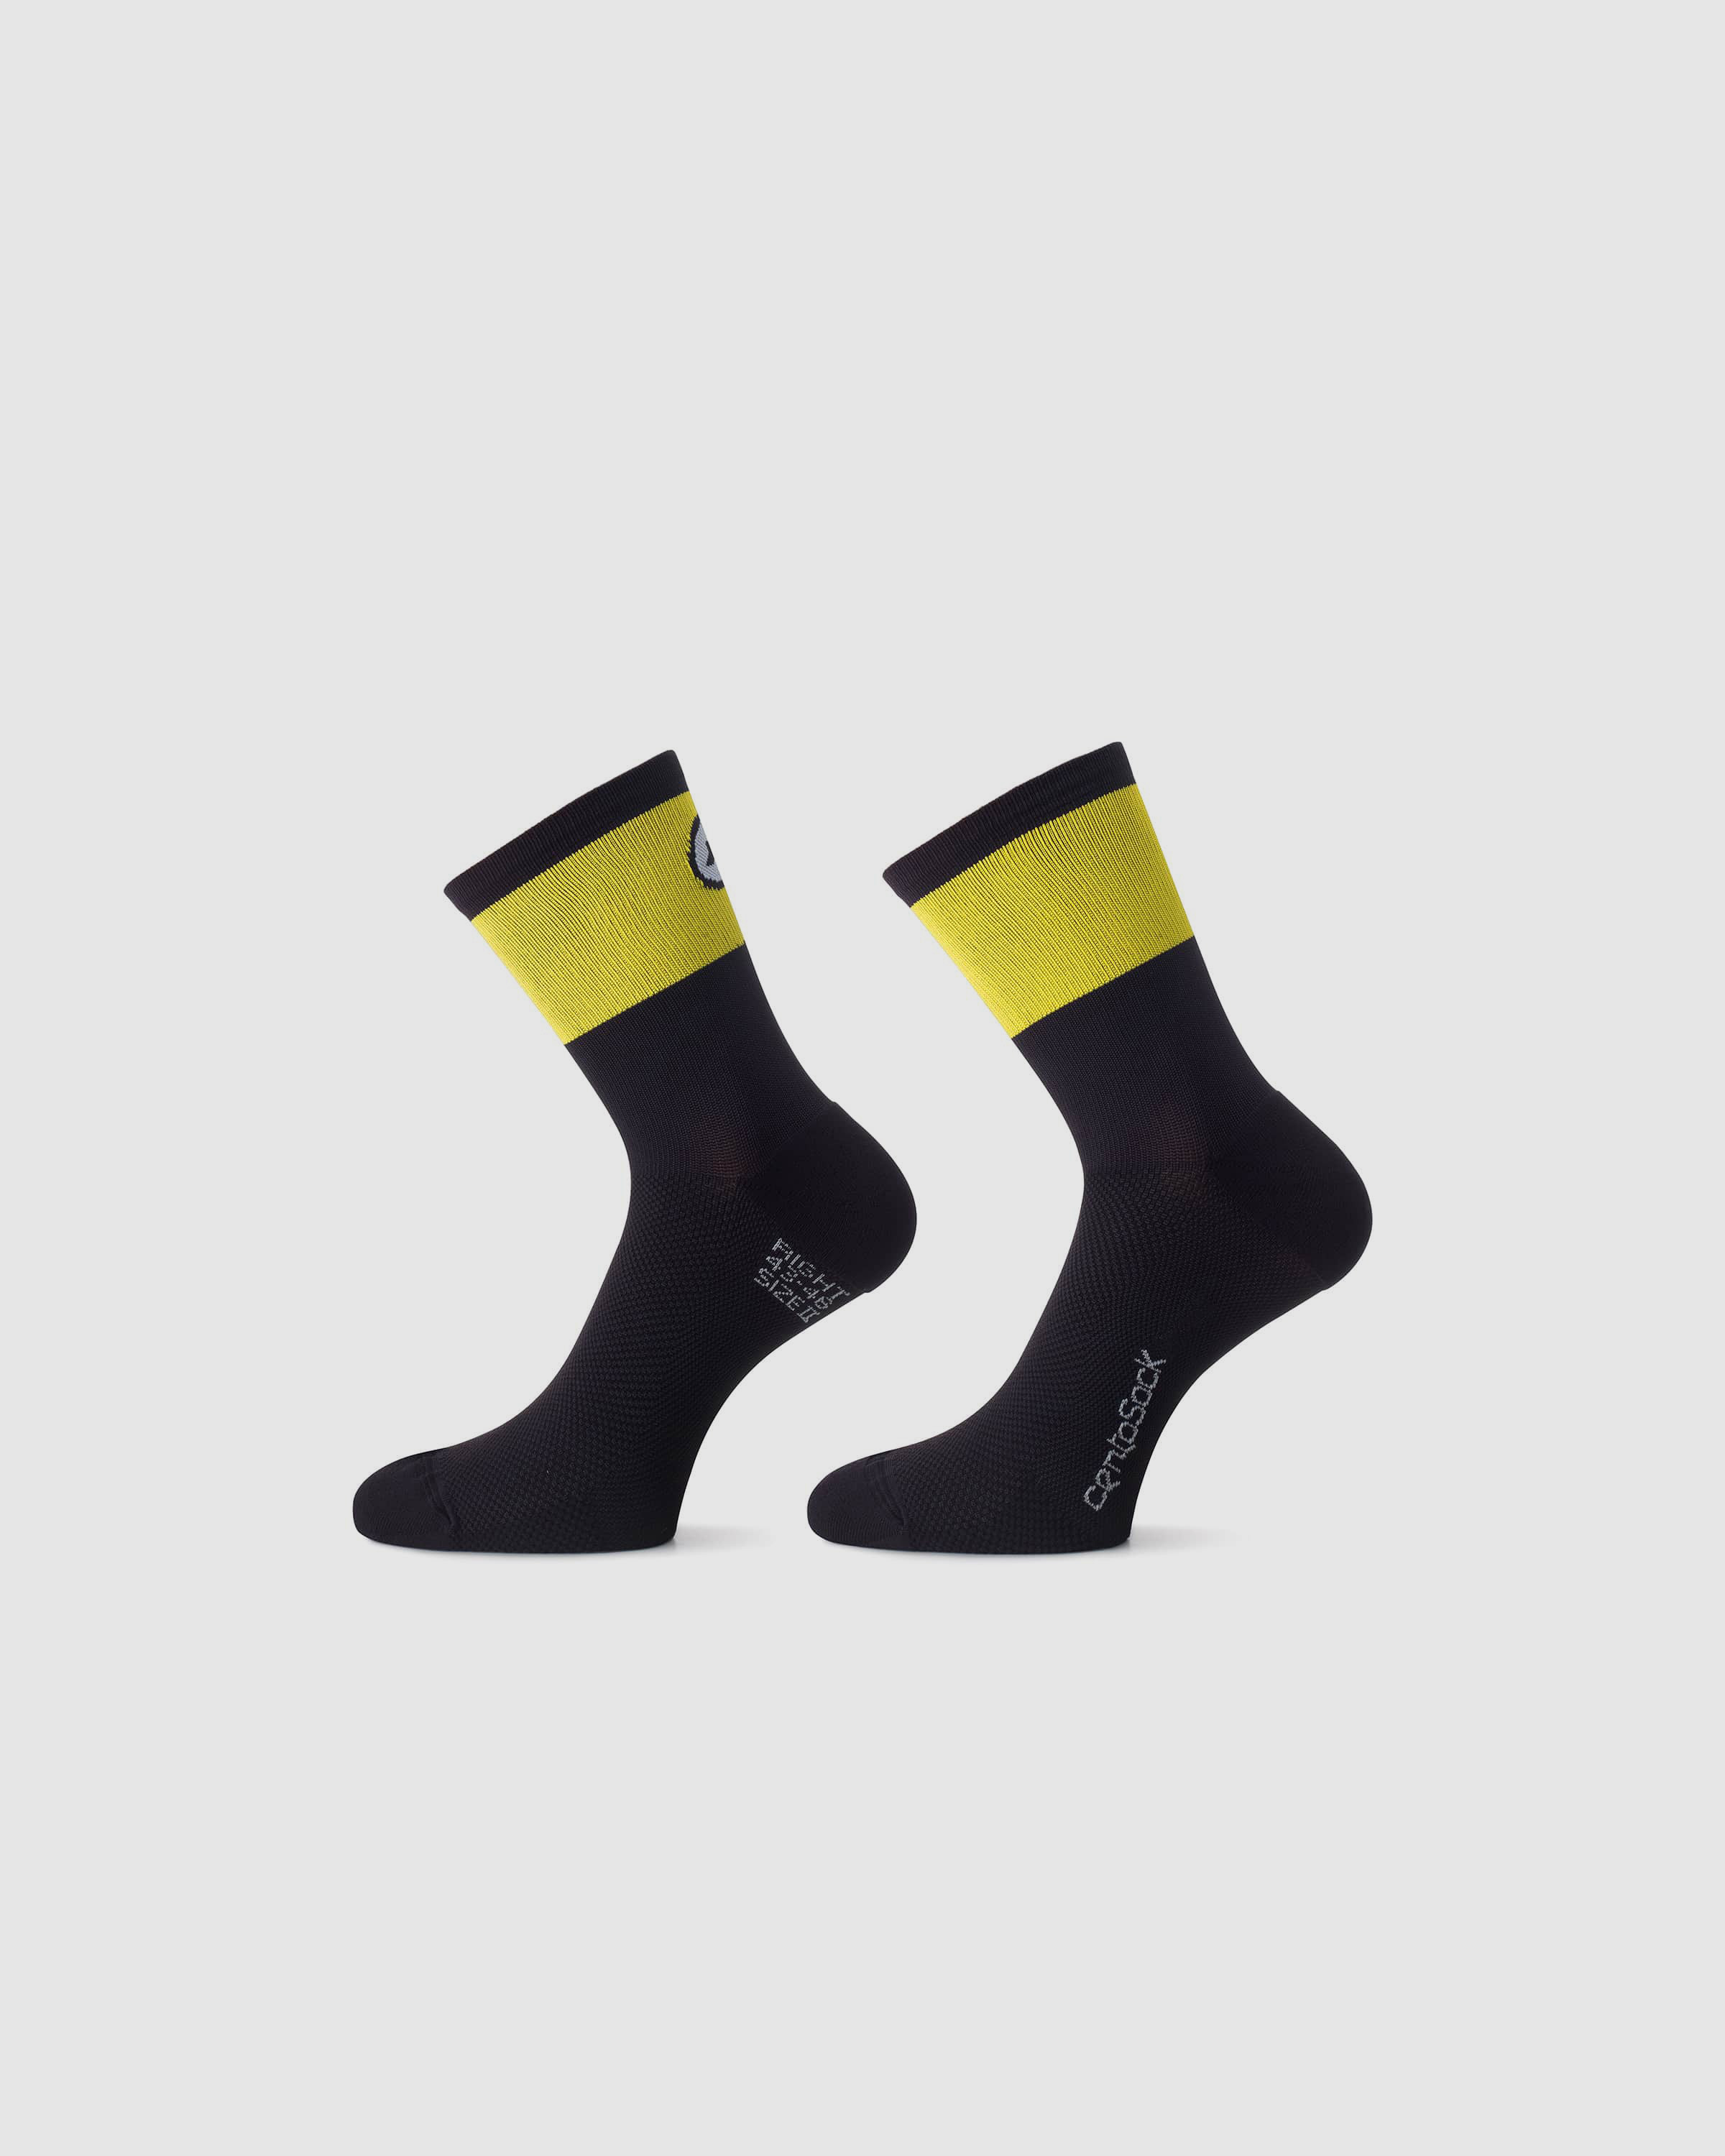 centoSocks_evo8 - ASSOS Of Switzerland - Official Outlet